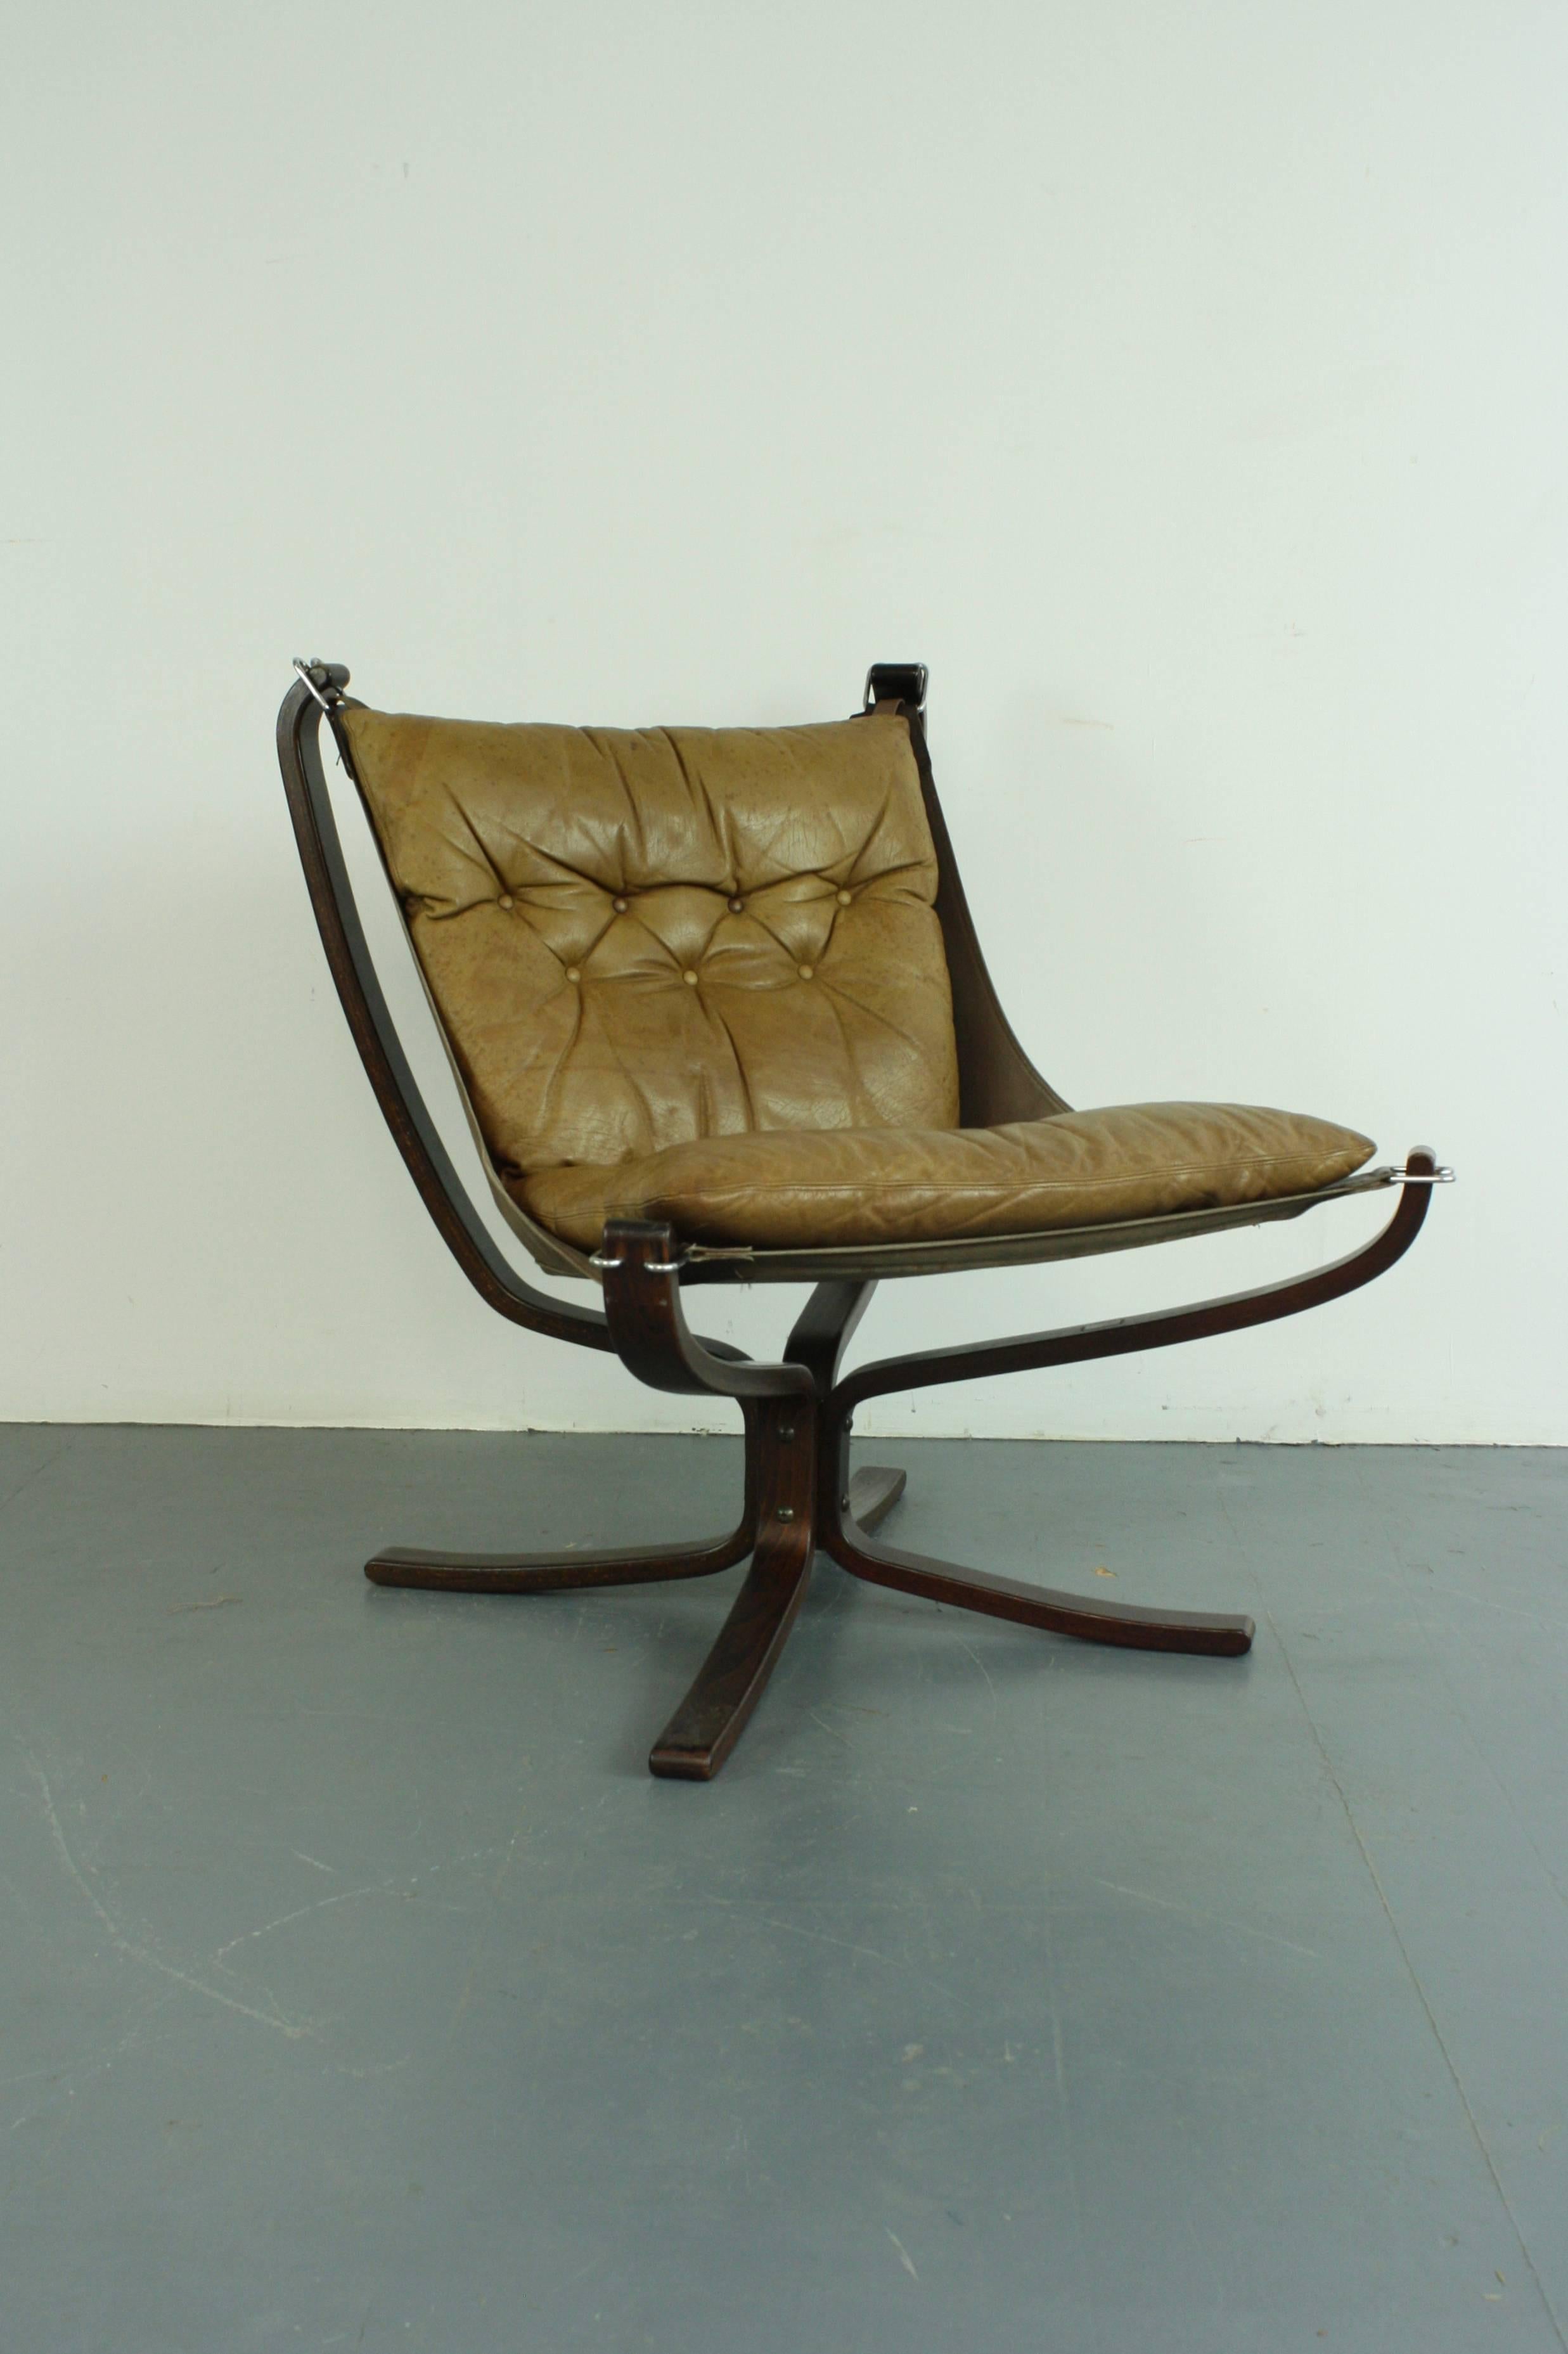 Lovely low back camel leather Falcon chair designed by the Norwegian designer, Sigurd Resell, in the 1970s. With rosewood base which is an X-shape. 

In good vintage condition. The leather is in good condition for its age with no rips or tears -